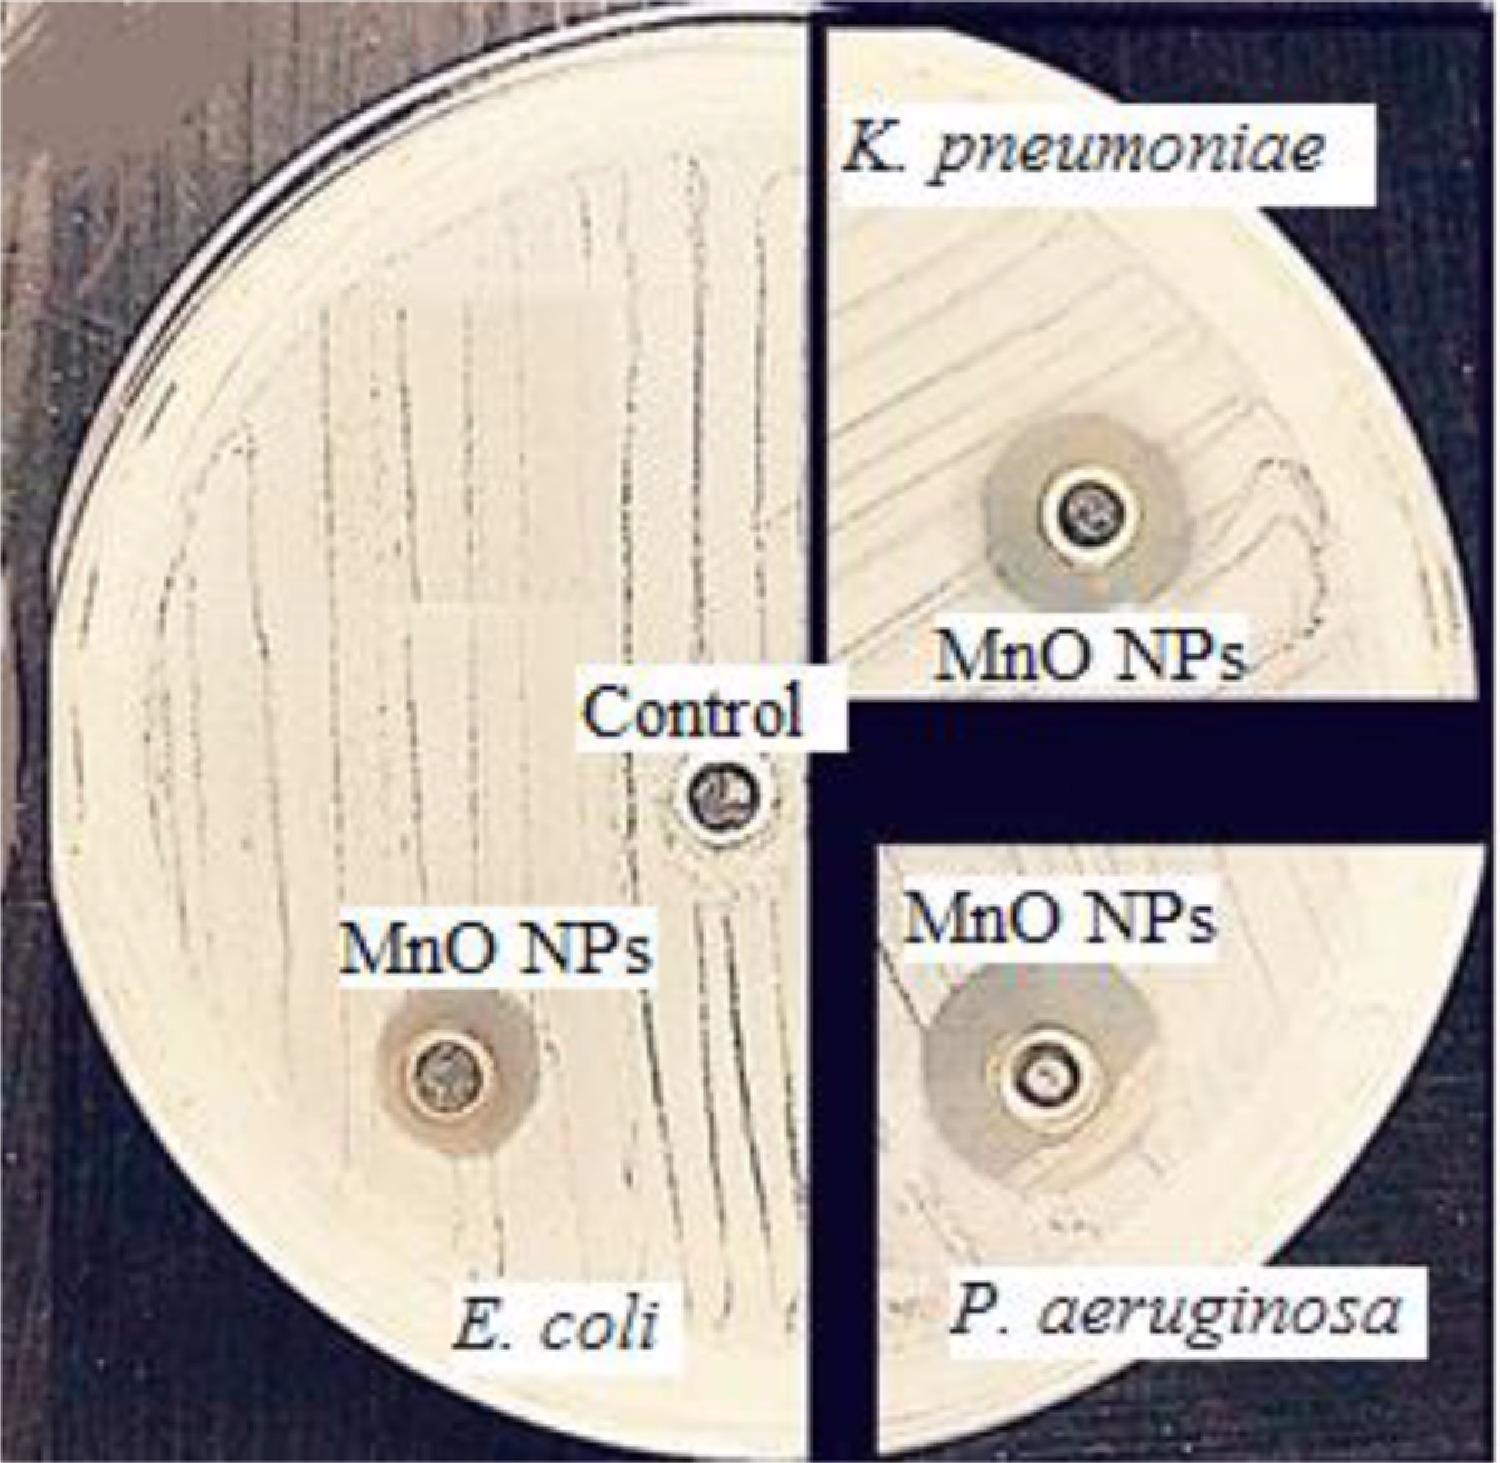 Scanned of antimicrobial activity of MnO NPs against E. coli, K. pneumoniae, and P. aeruginosa.